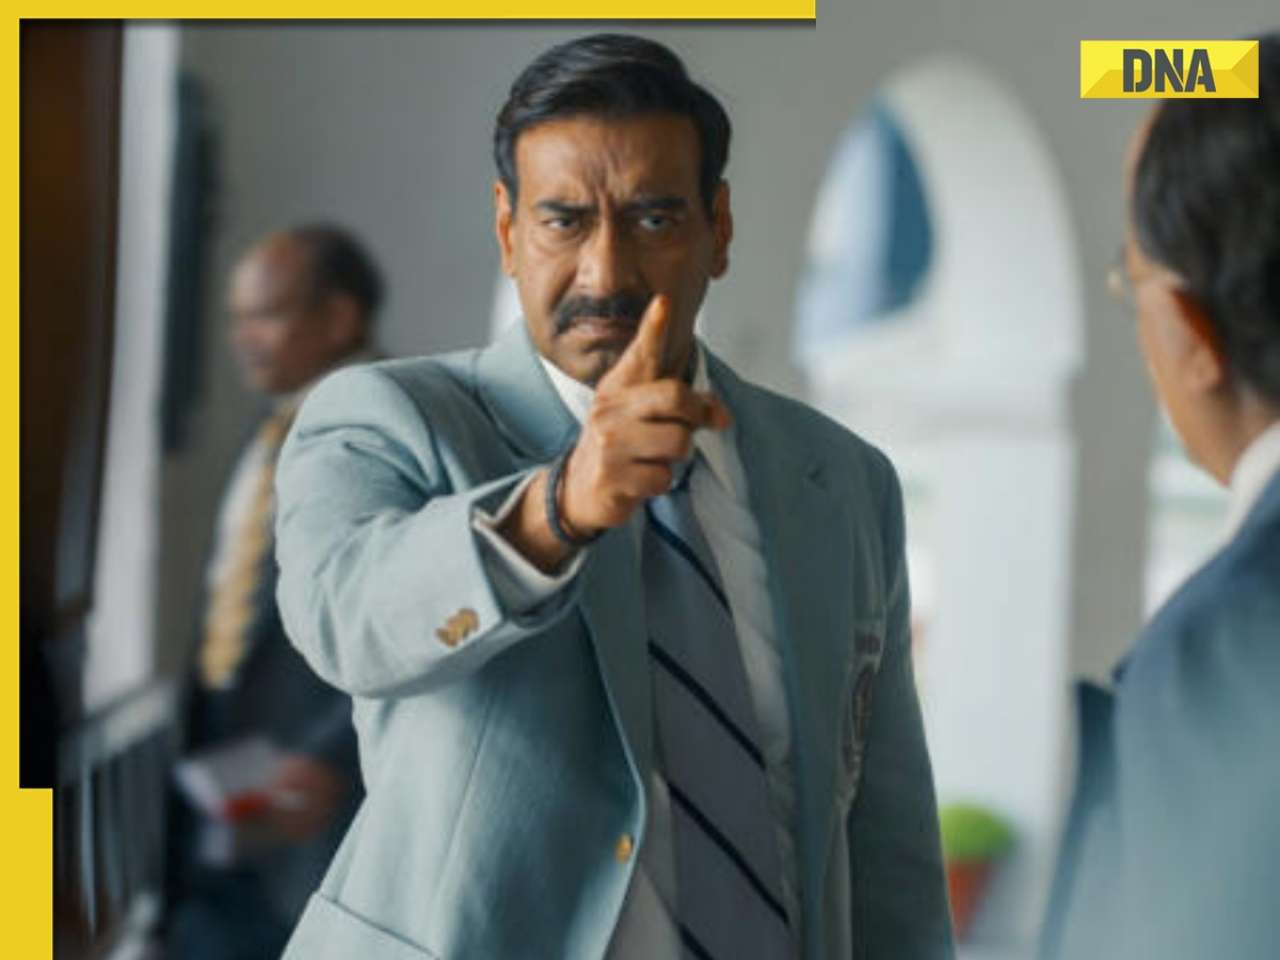 Maidaan box office collection day 2: Ajay Devgn’s film continues to struggle, earns only Rs 2.75 crore on first Friday